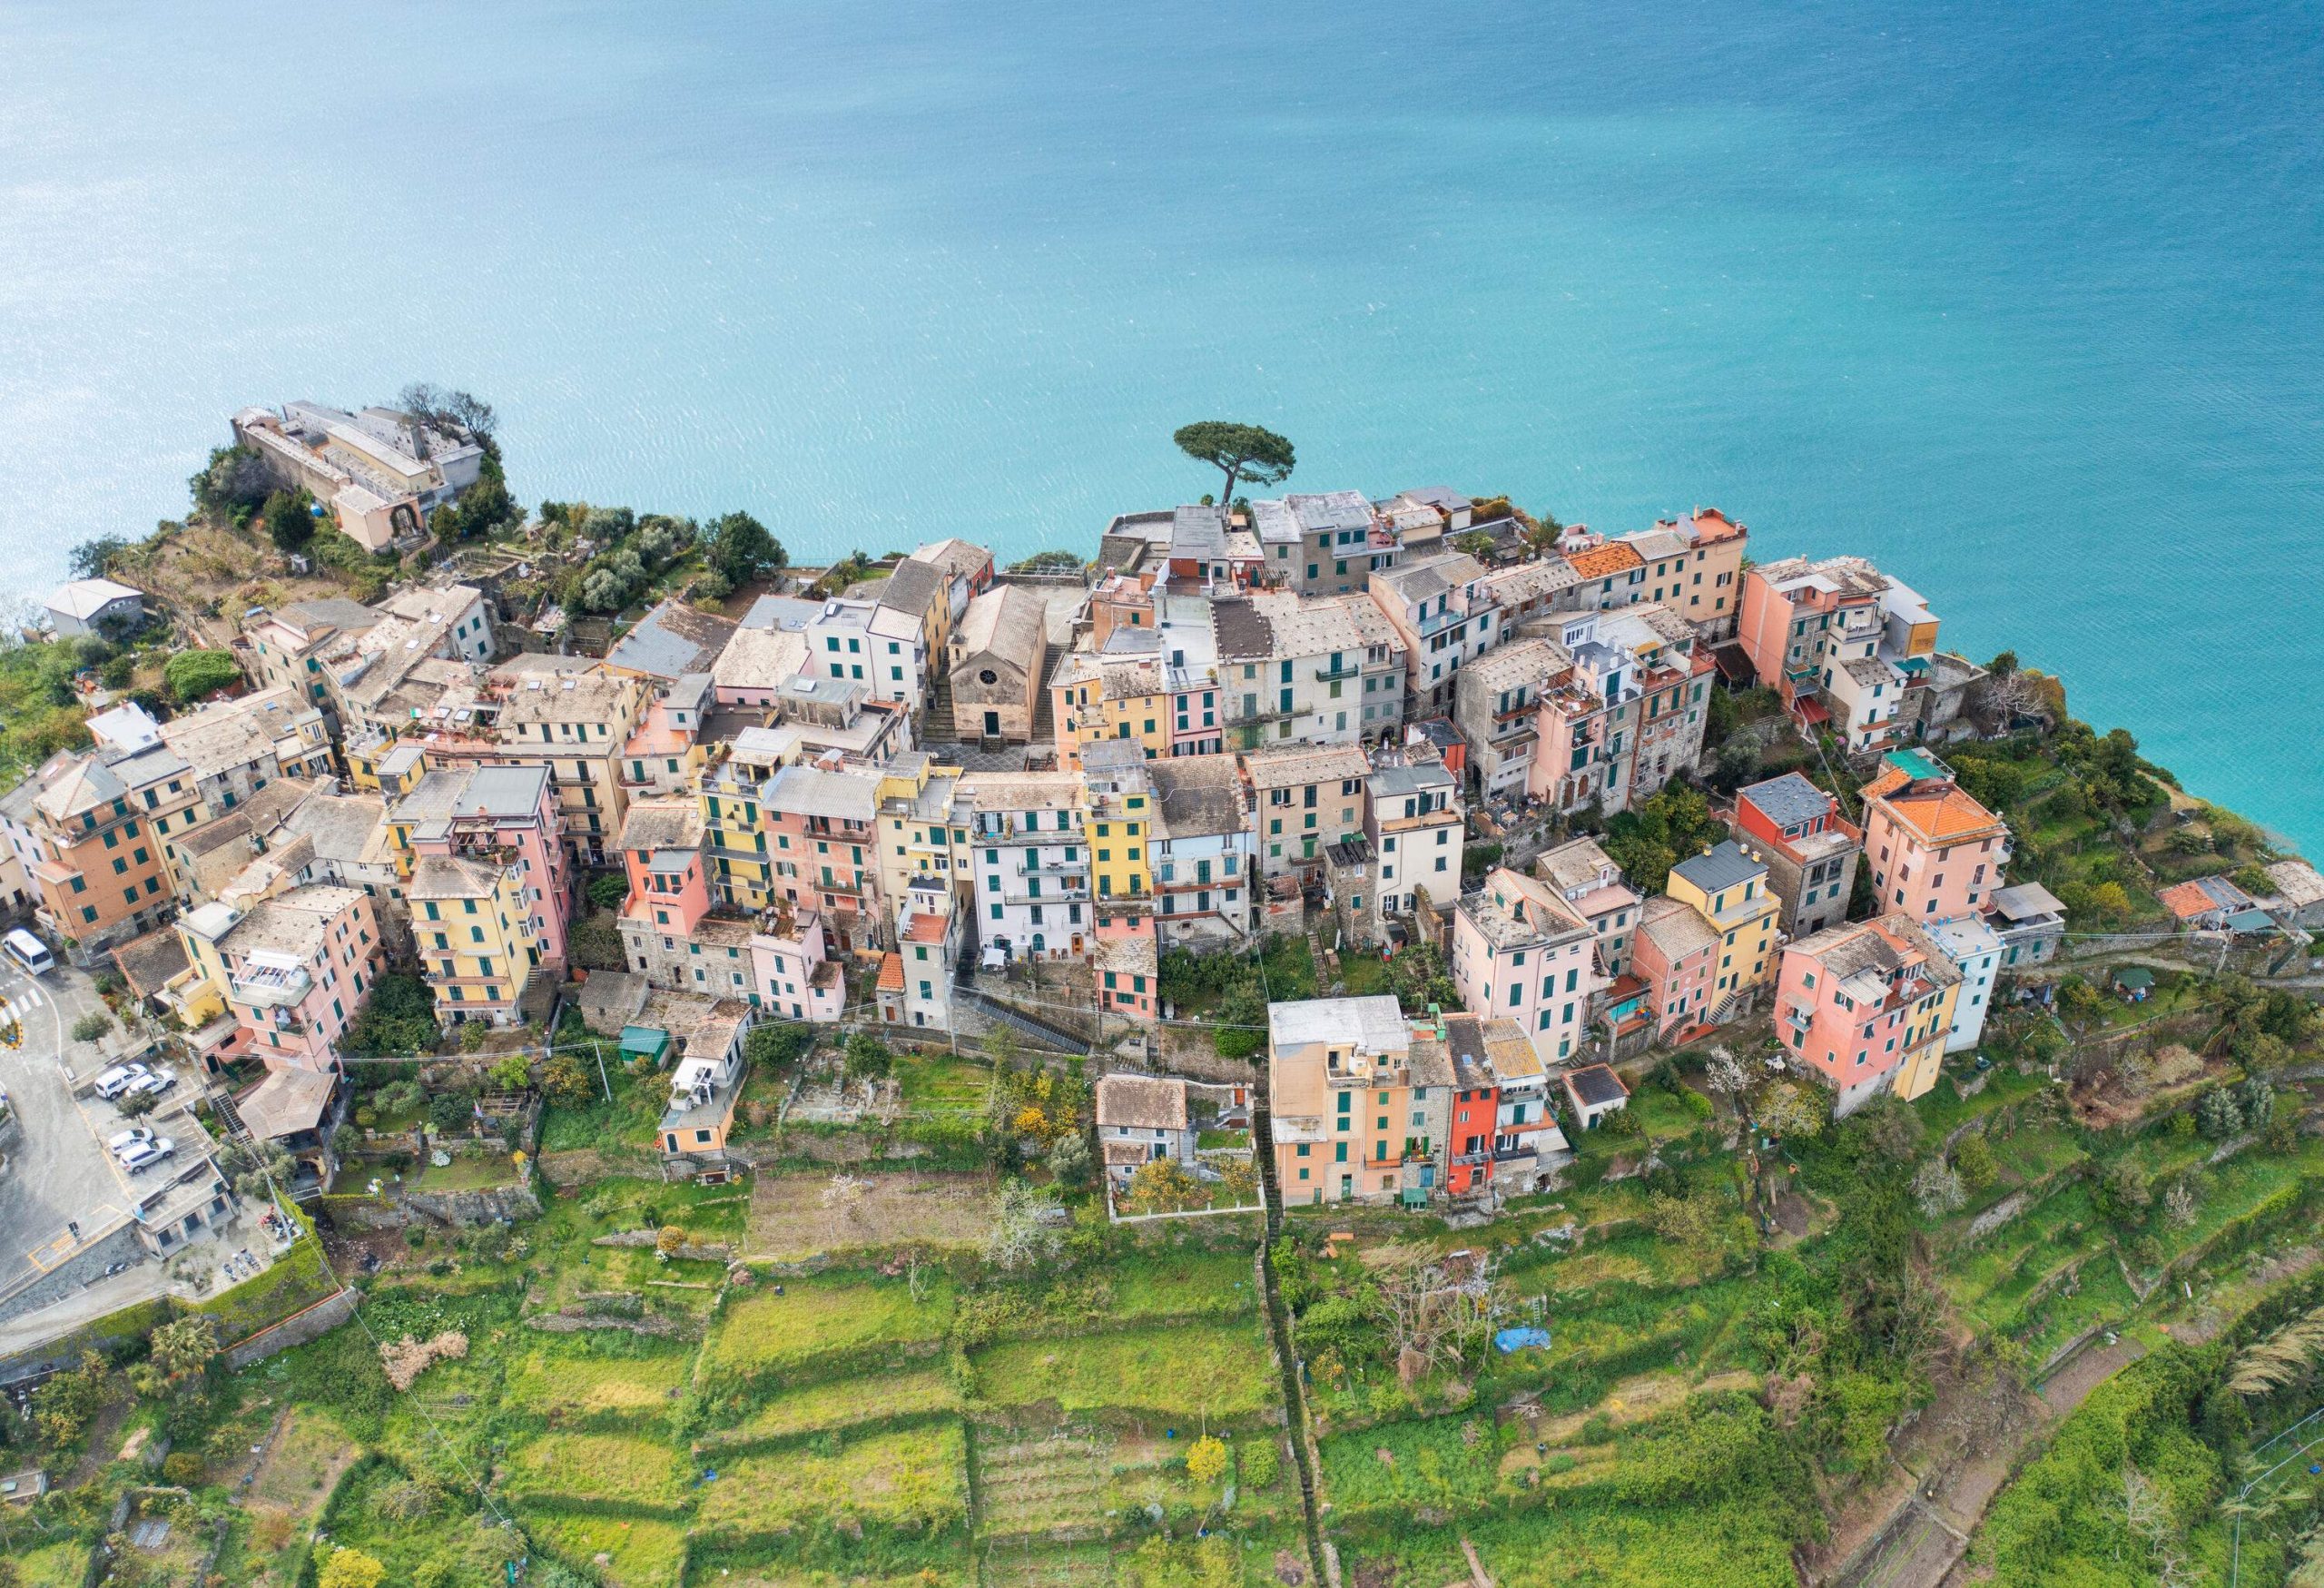 A spectacular view of the picturesque village with colourful houses set on a cliff overlooking the ocean.